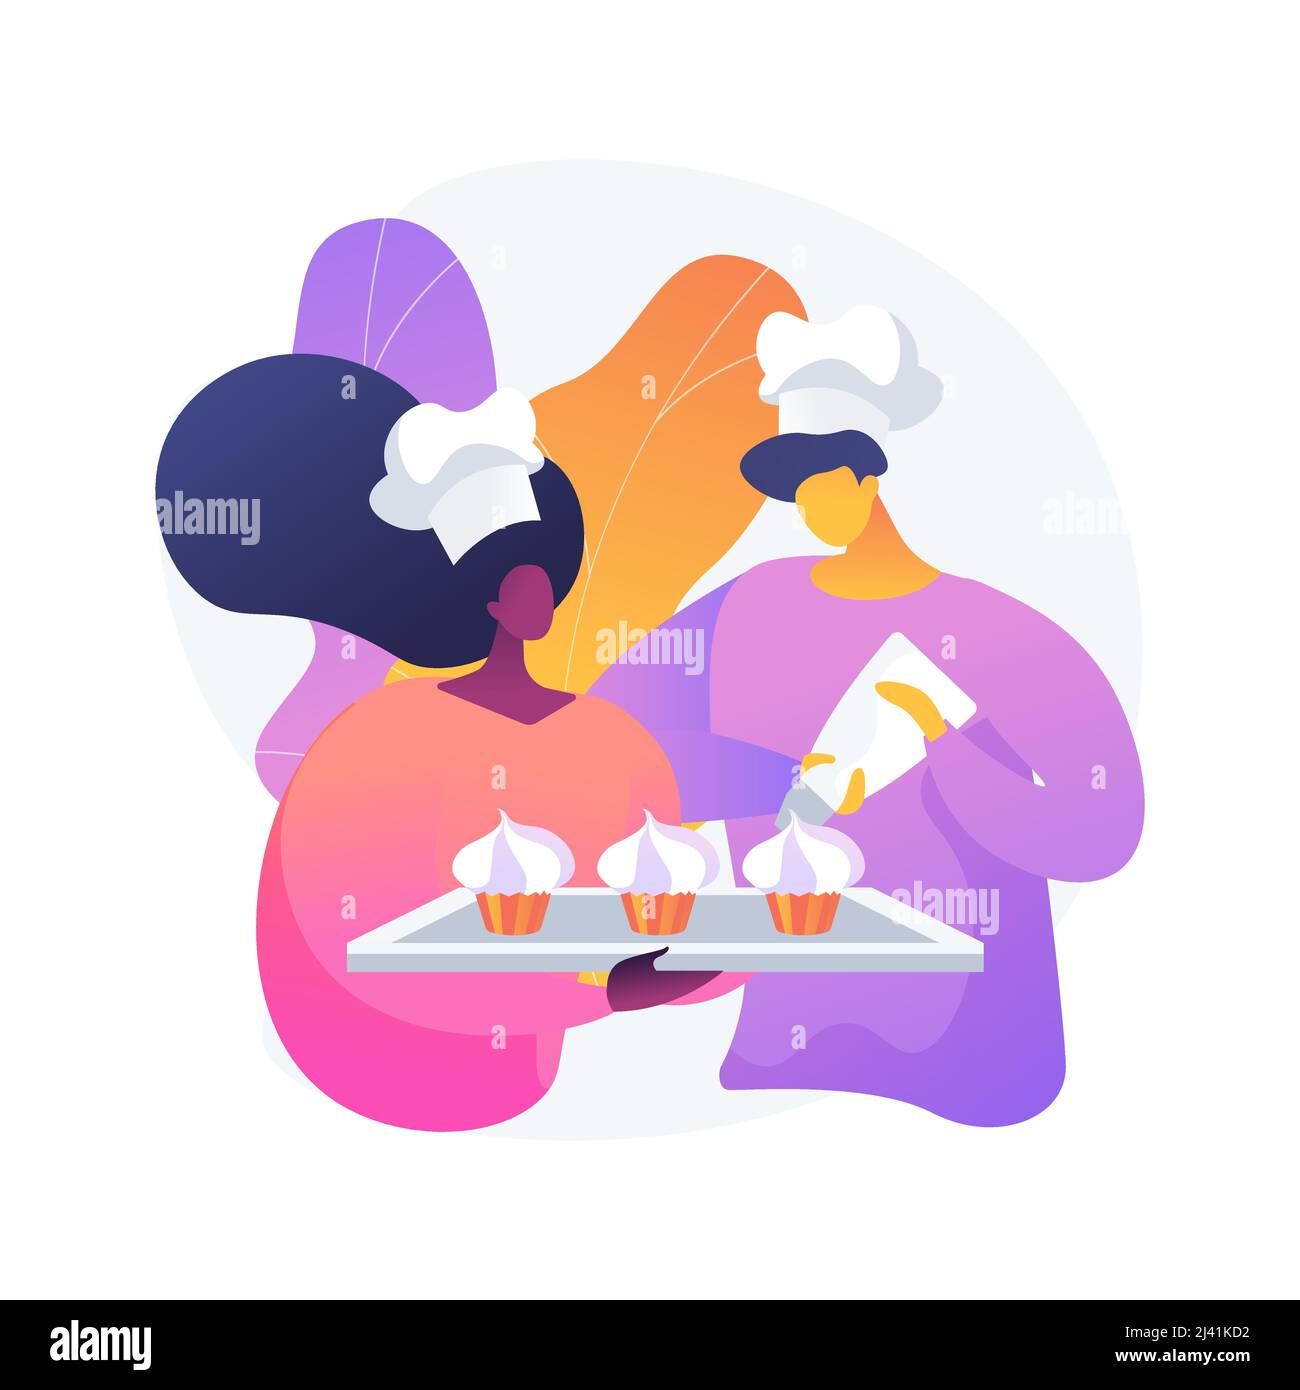 Bake together abstract concept vector illustration. Family fun during quarantine, home sitting ideas, spending time together during isolation, adults Stock Vector